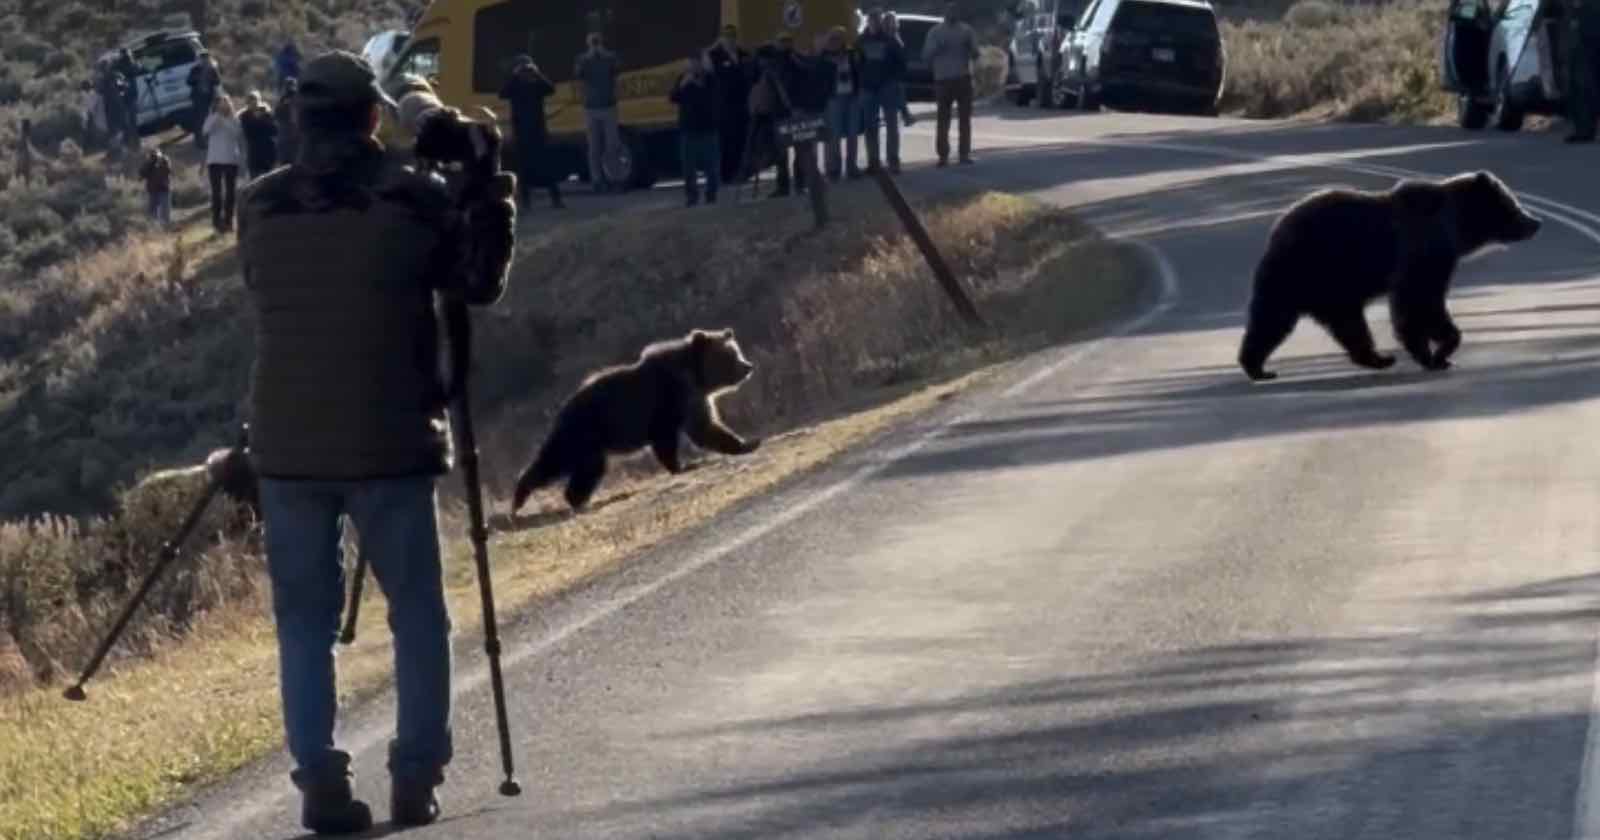 A group of people, some with cameras, stand at a distance on the side of a road while two bears cross it. One bear is in the middle of the road, and the other is near the edge. Vehicles are parked on the roadside, and a person with a tripod is in the foreground.